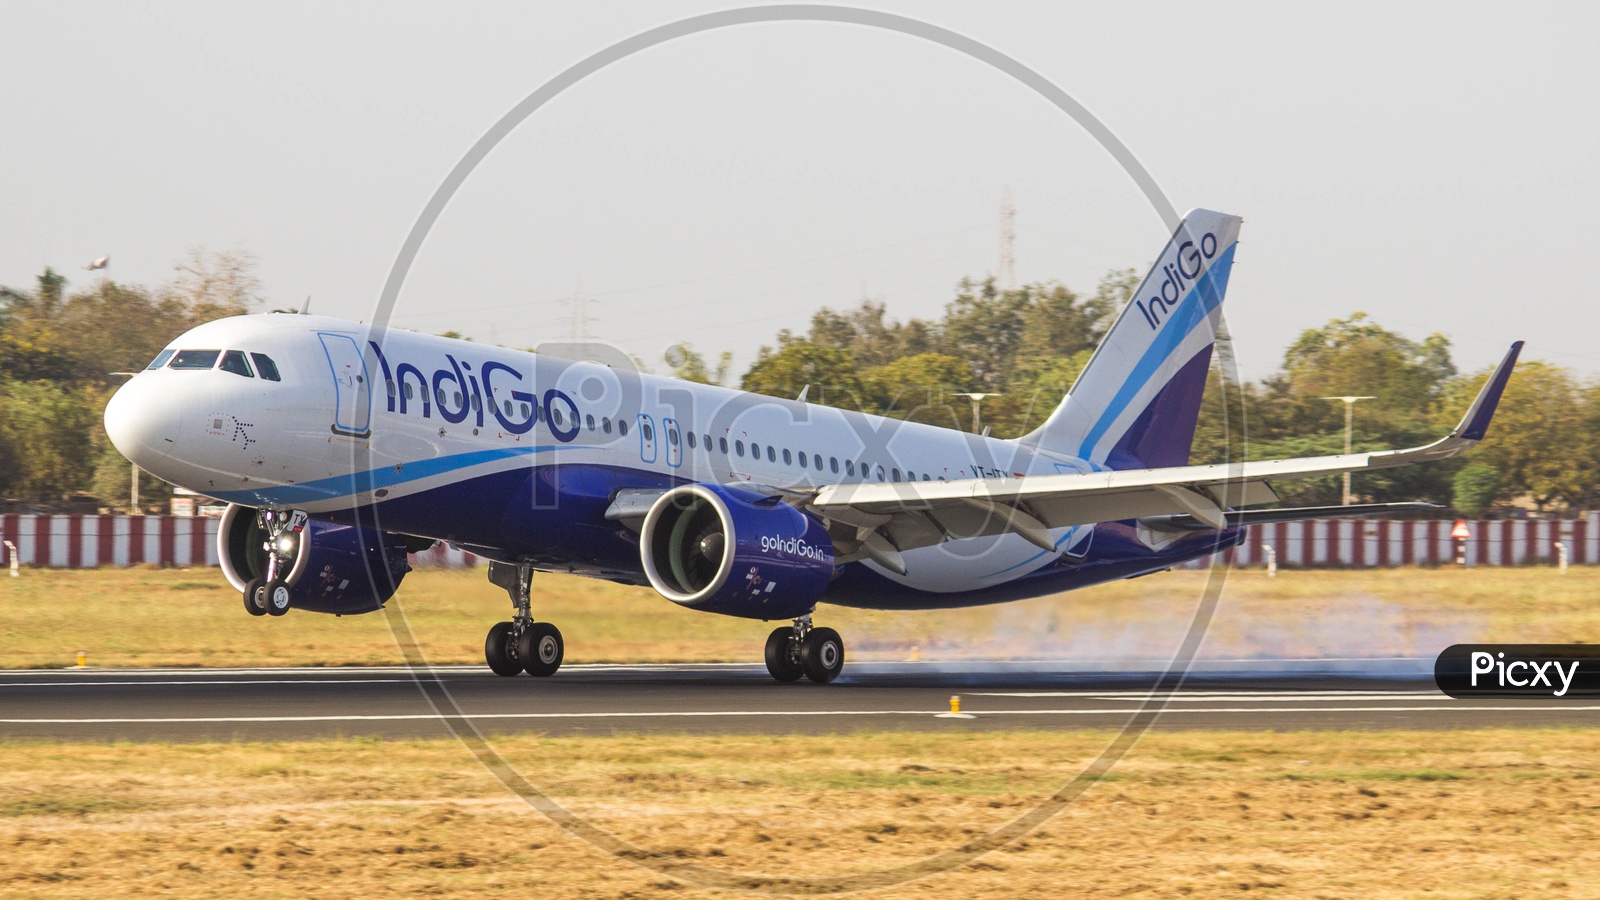 IndiGo A320 TOUCHING DOWN AFTER COMPLETING ITS FLIGHT.